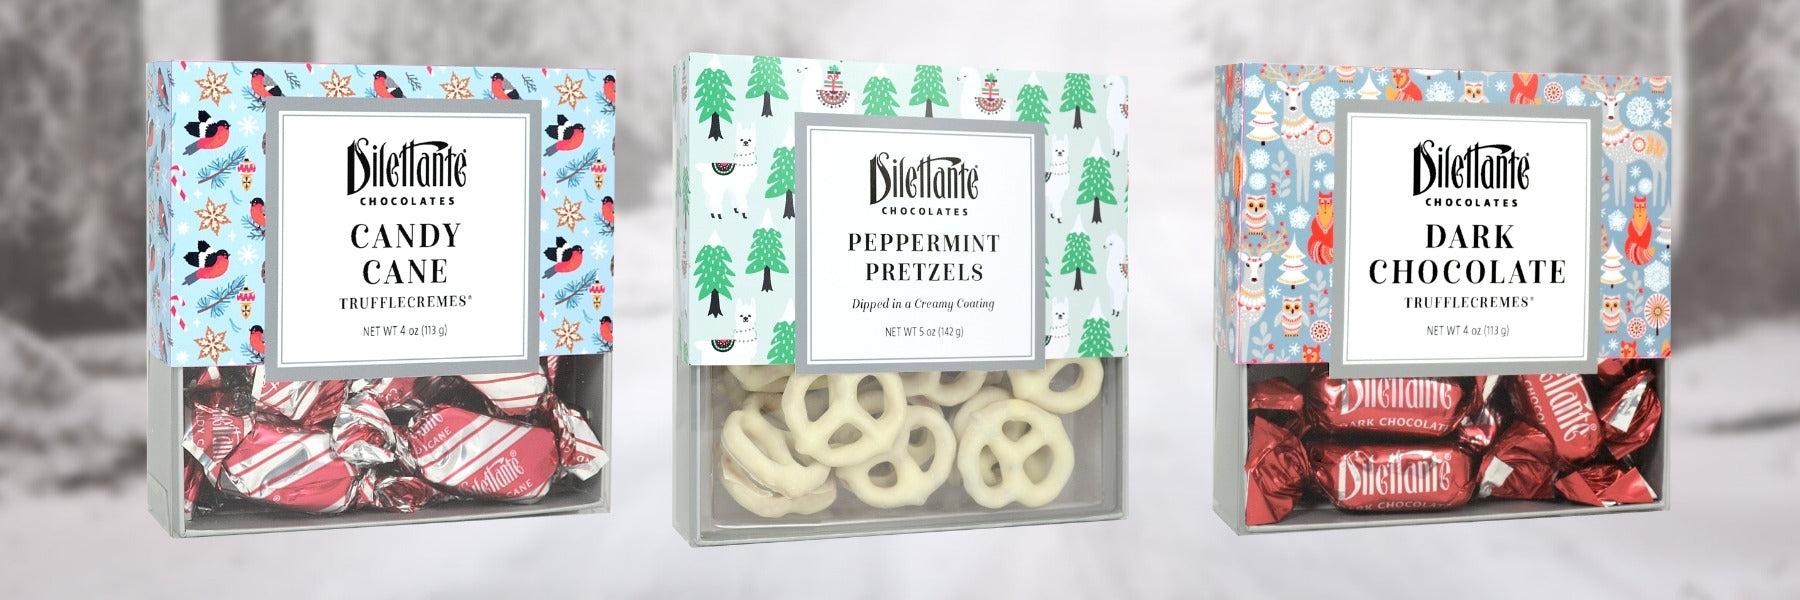 Dilettante Chocolates New Holiday Gift Boxes Featuring TruffleCremes and Peppermint Pretzels